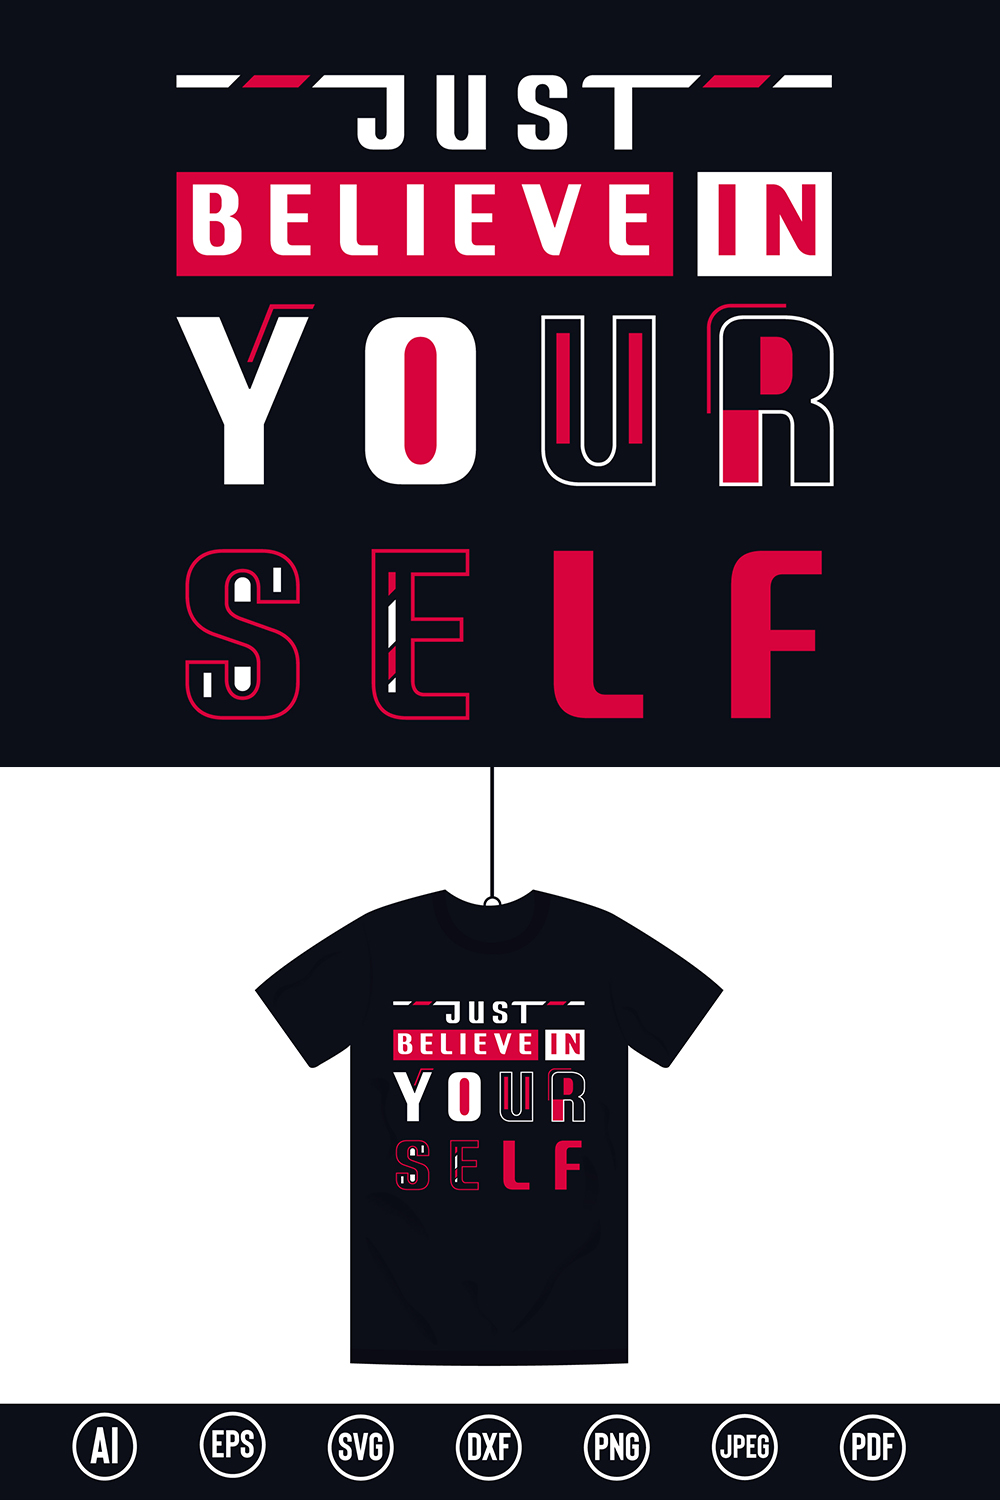 Motivational & Modern Typography T-Shirt design with “Just Believe in your self” quote for t-shirt, posters, stickers, mug prints, banners, gift cards, labels etc pinterest preview image.